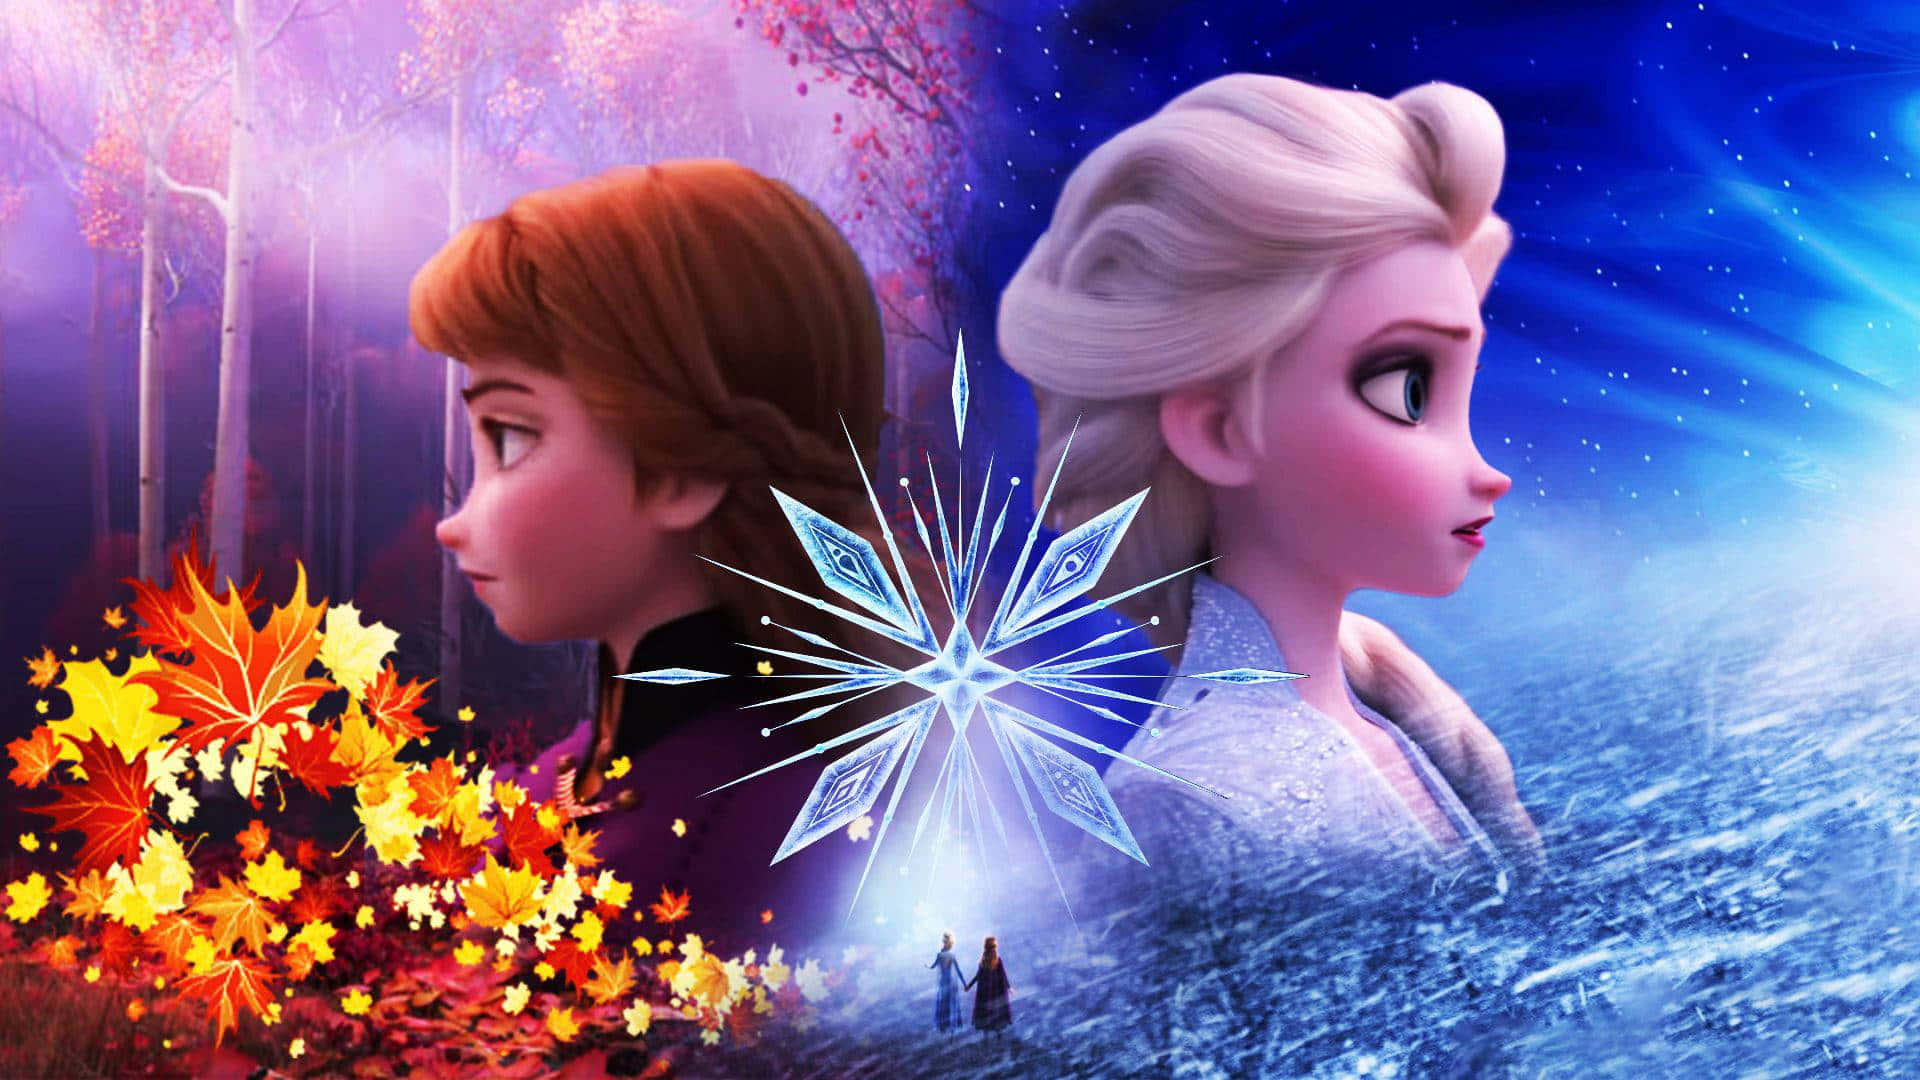 Anna, Elsa and Olaf embark on an all new adventure in Frozen 2